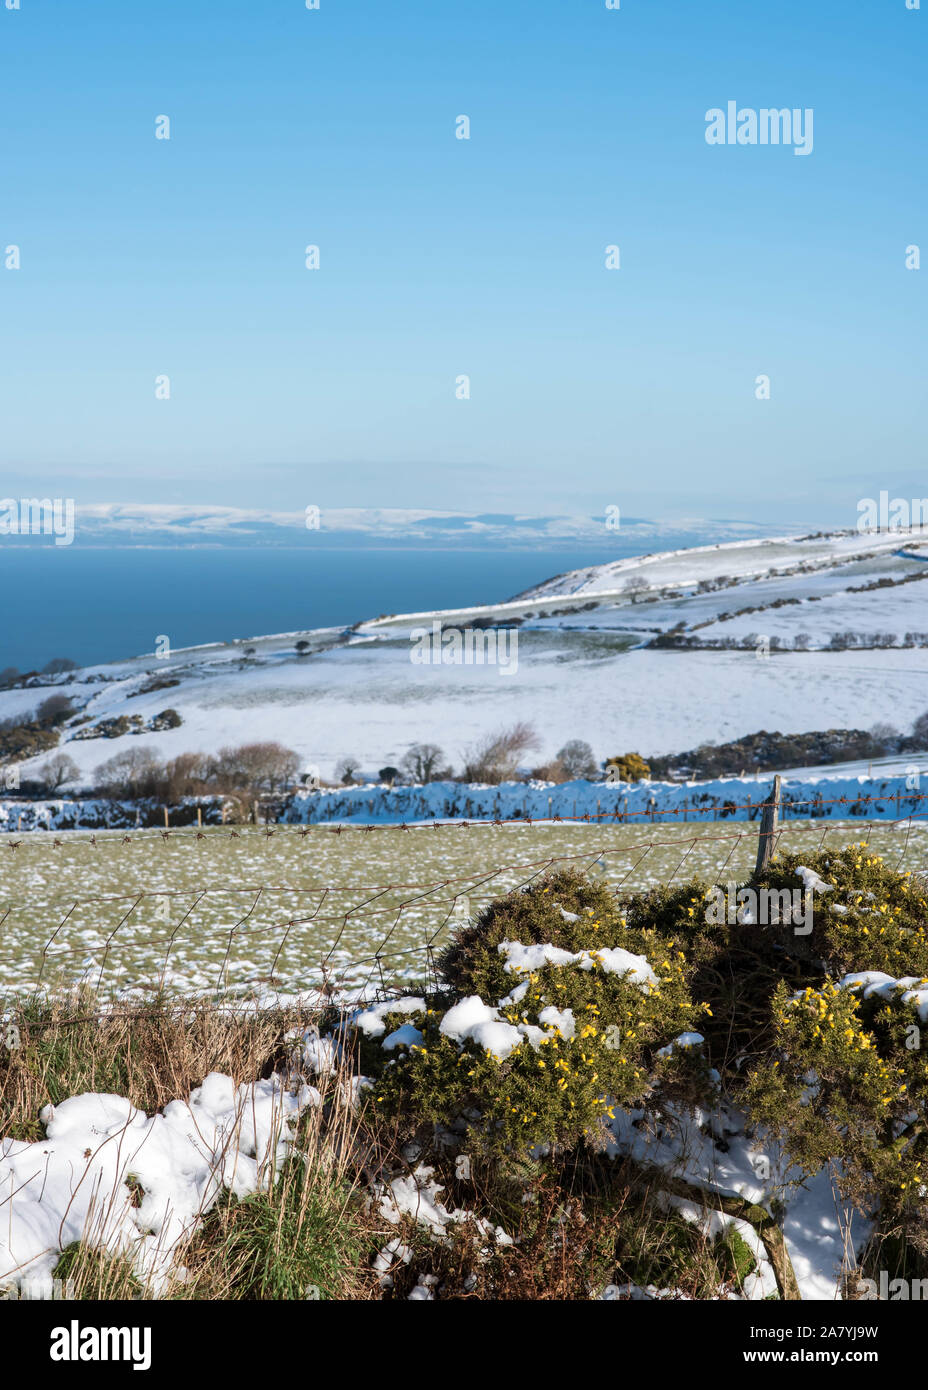 Snowfall on Exmoor National Park during Winter, overlooking the Bristol Channel, North Devon, February 2019 Stock Photo